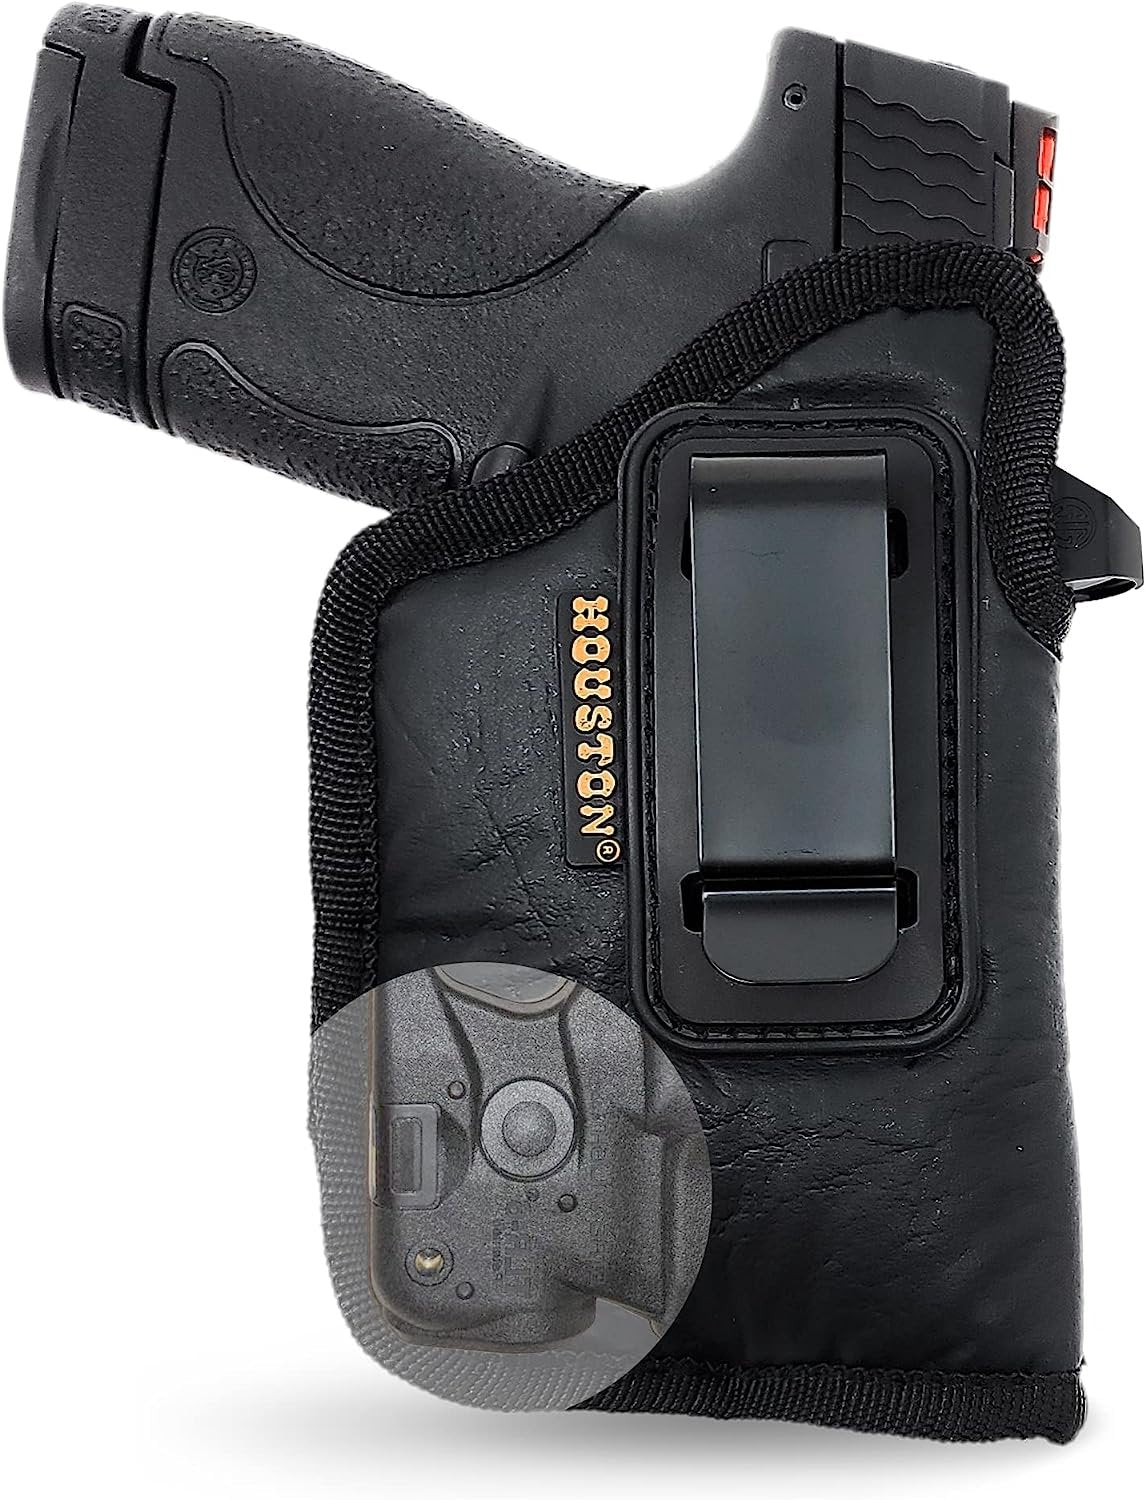 Houston Gun Holsters IWB Optical Gun Holster by Houston Eco Leather Concealed Carry Soft Material FITS Black CHPP-57GL-RH CHPP-57GL-RH